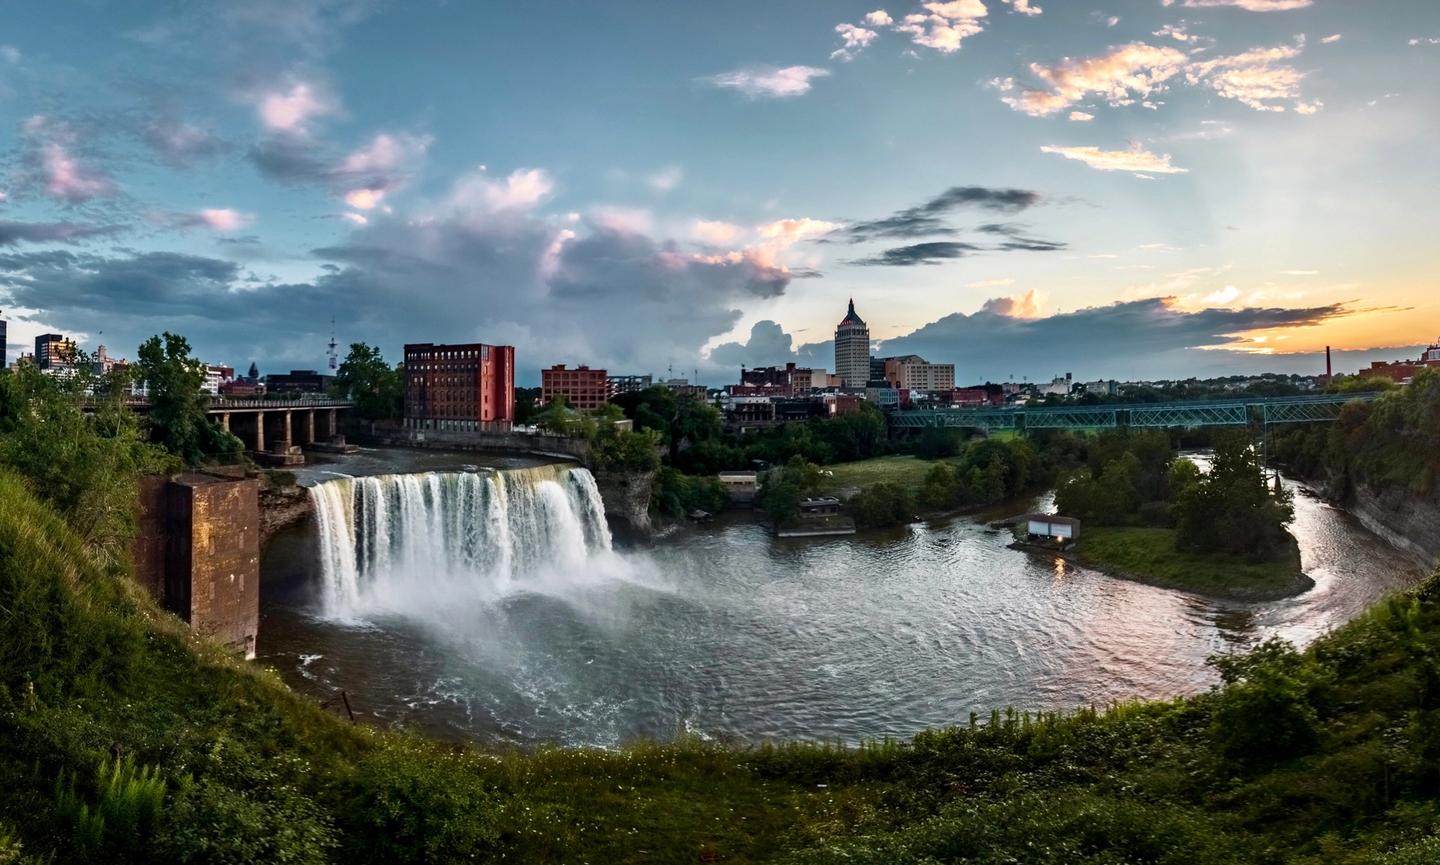 Enjoy the picturesque High Falls, one of three waterfalls located along the Genesee River in Rochester, N.Y.  